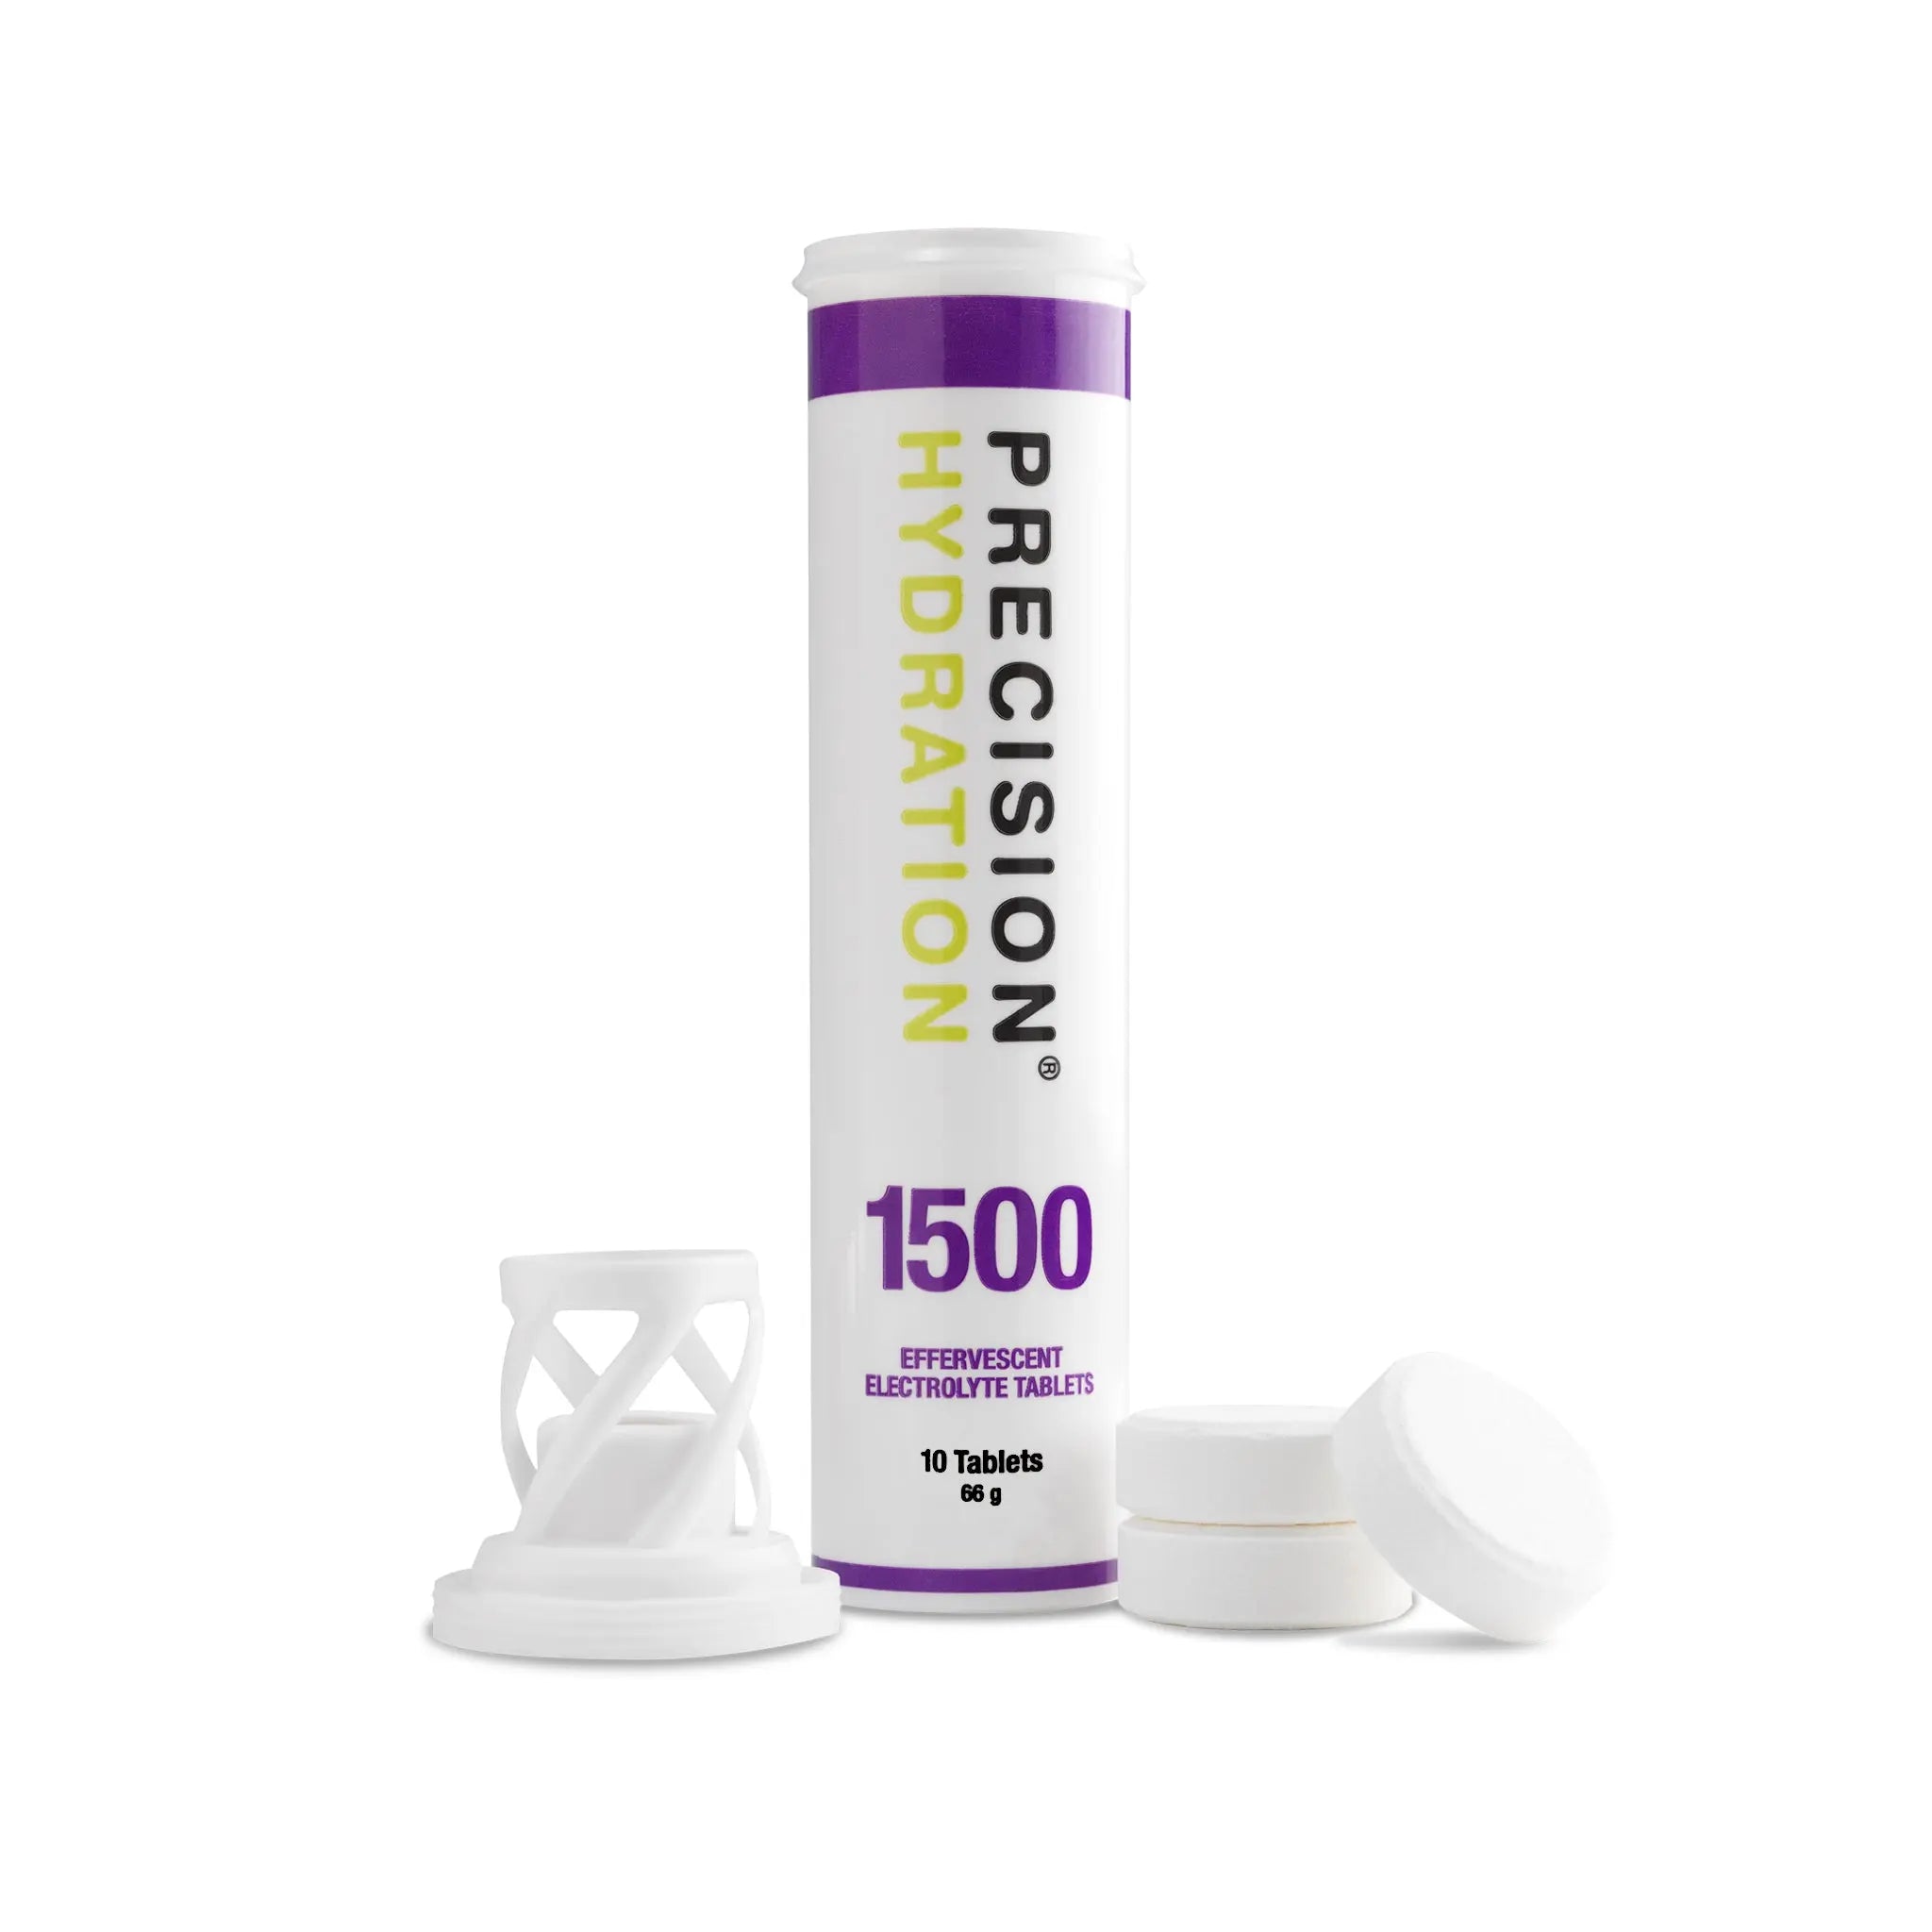 Precision Fuel & Hydration - PH 1500 Electrolyte Tablets